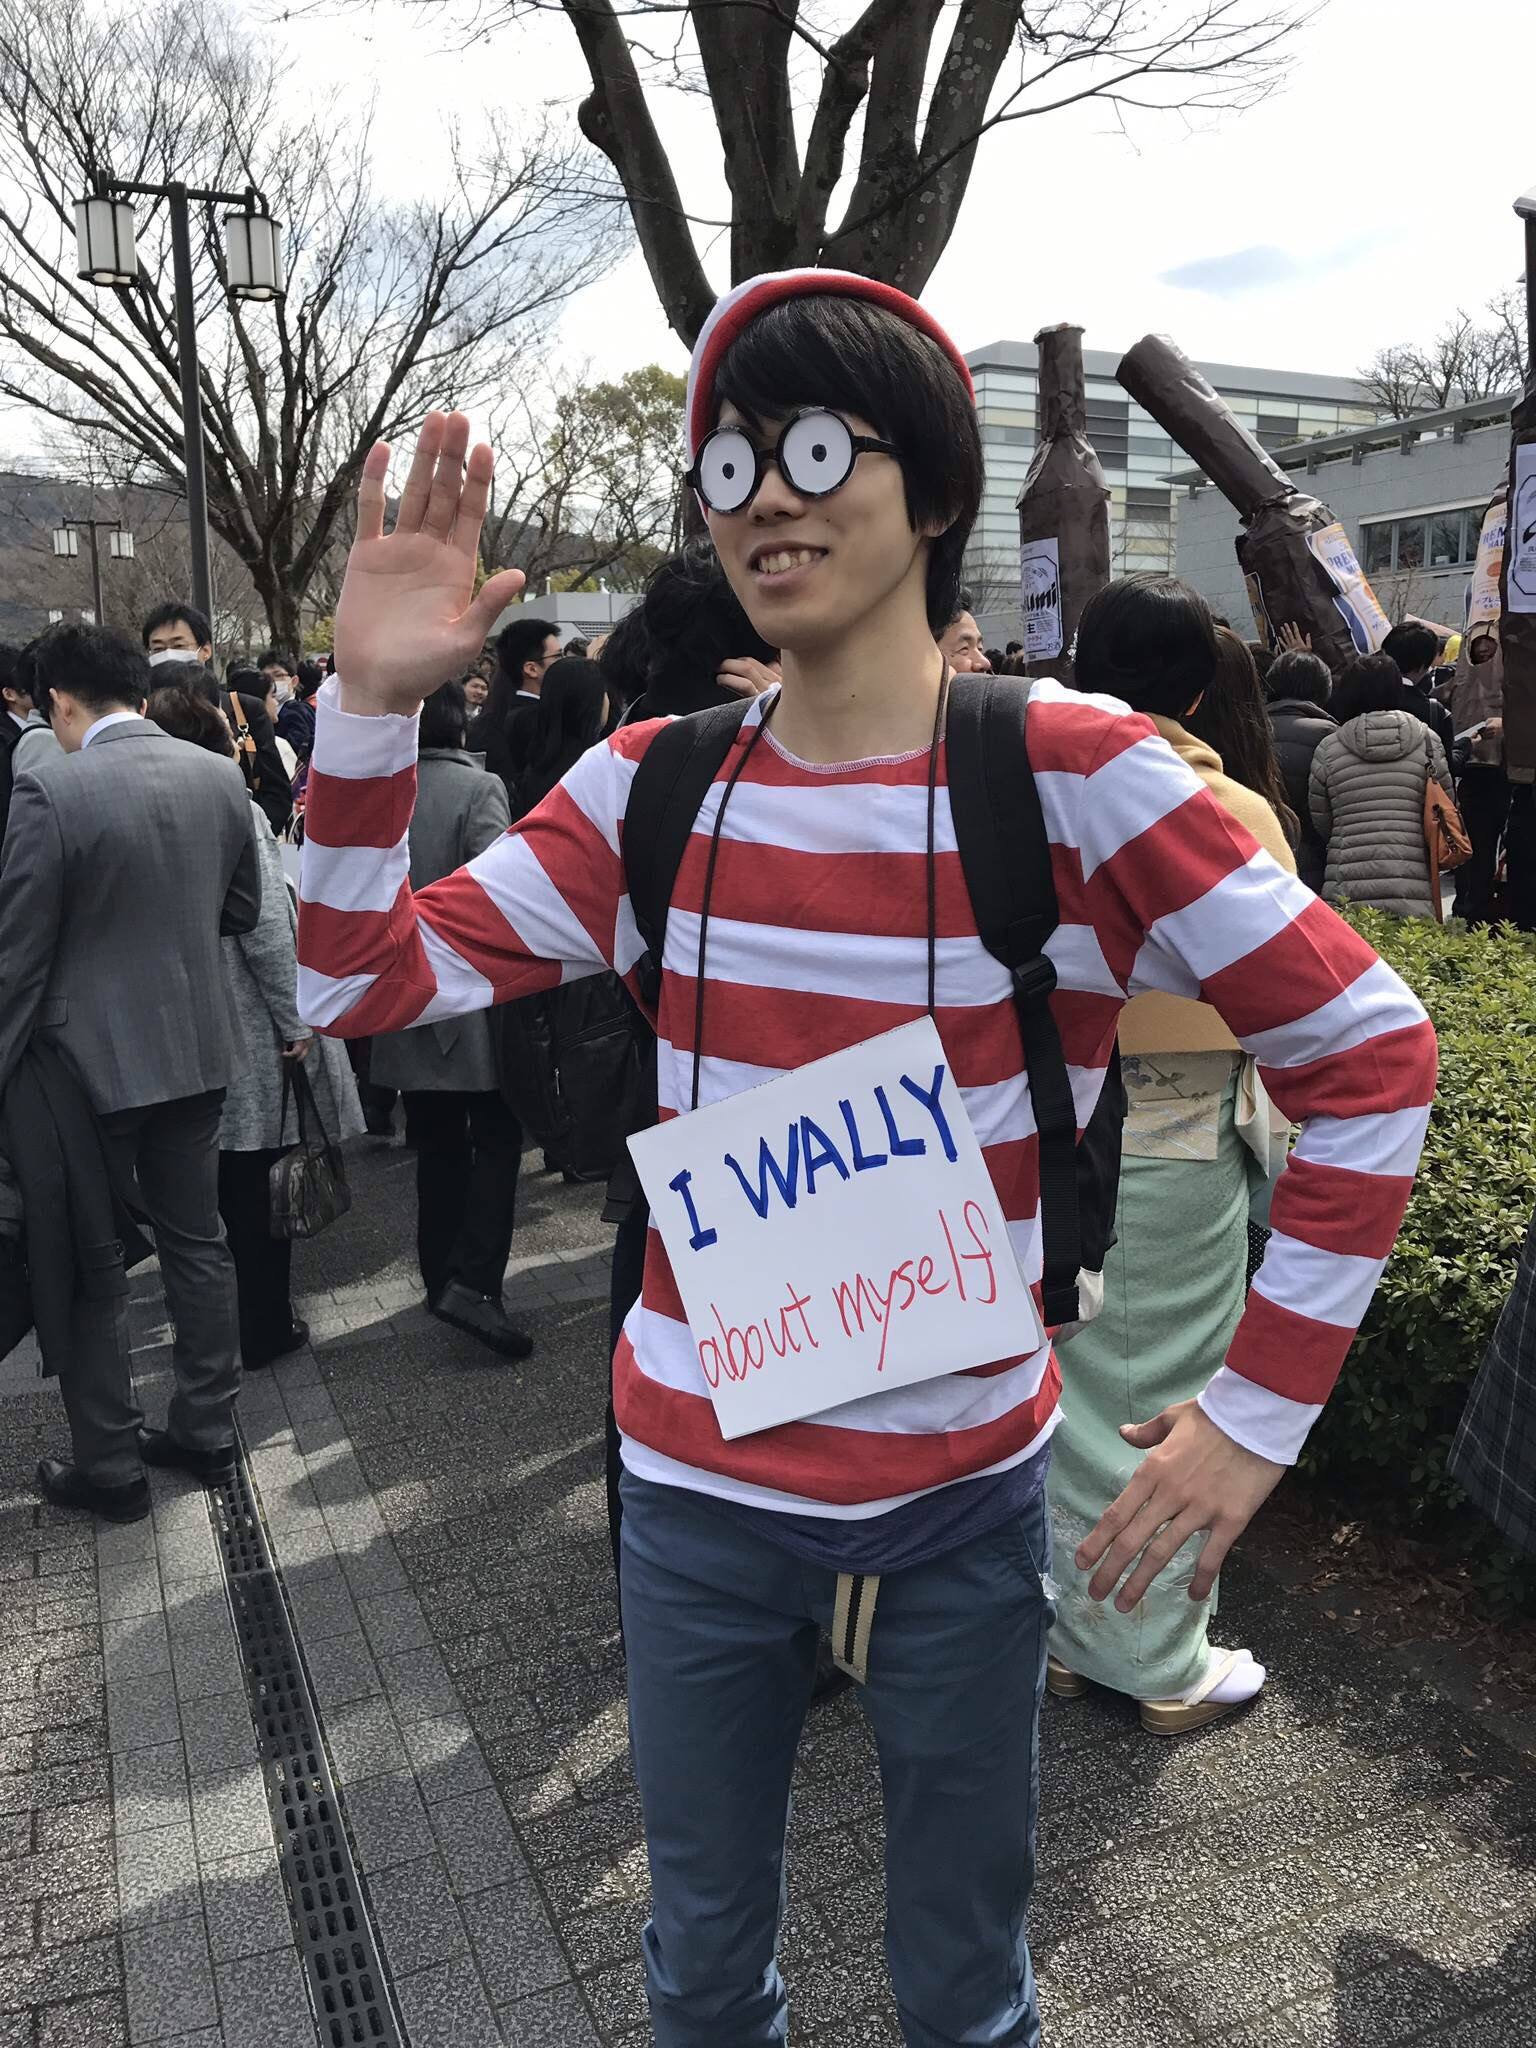 Japan’s "Wally" even showed up for the event. 